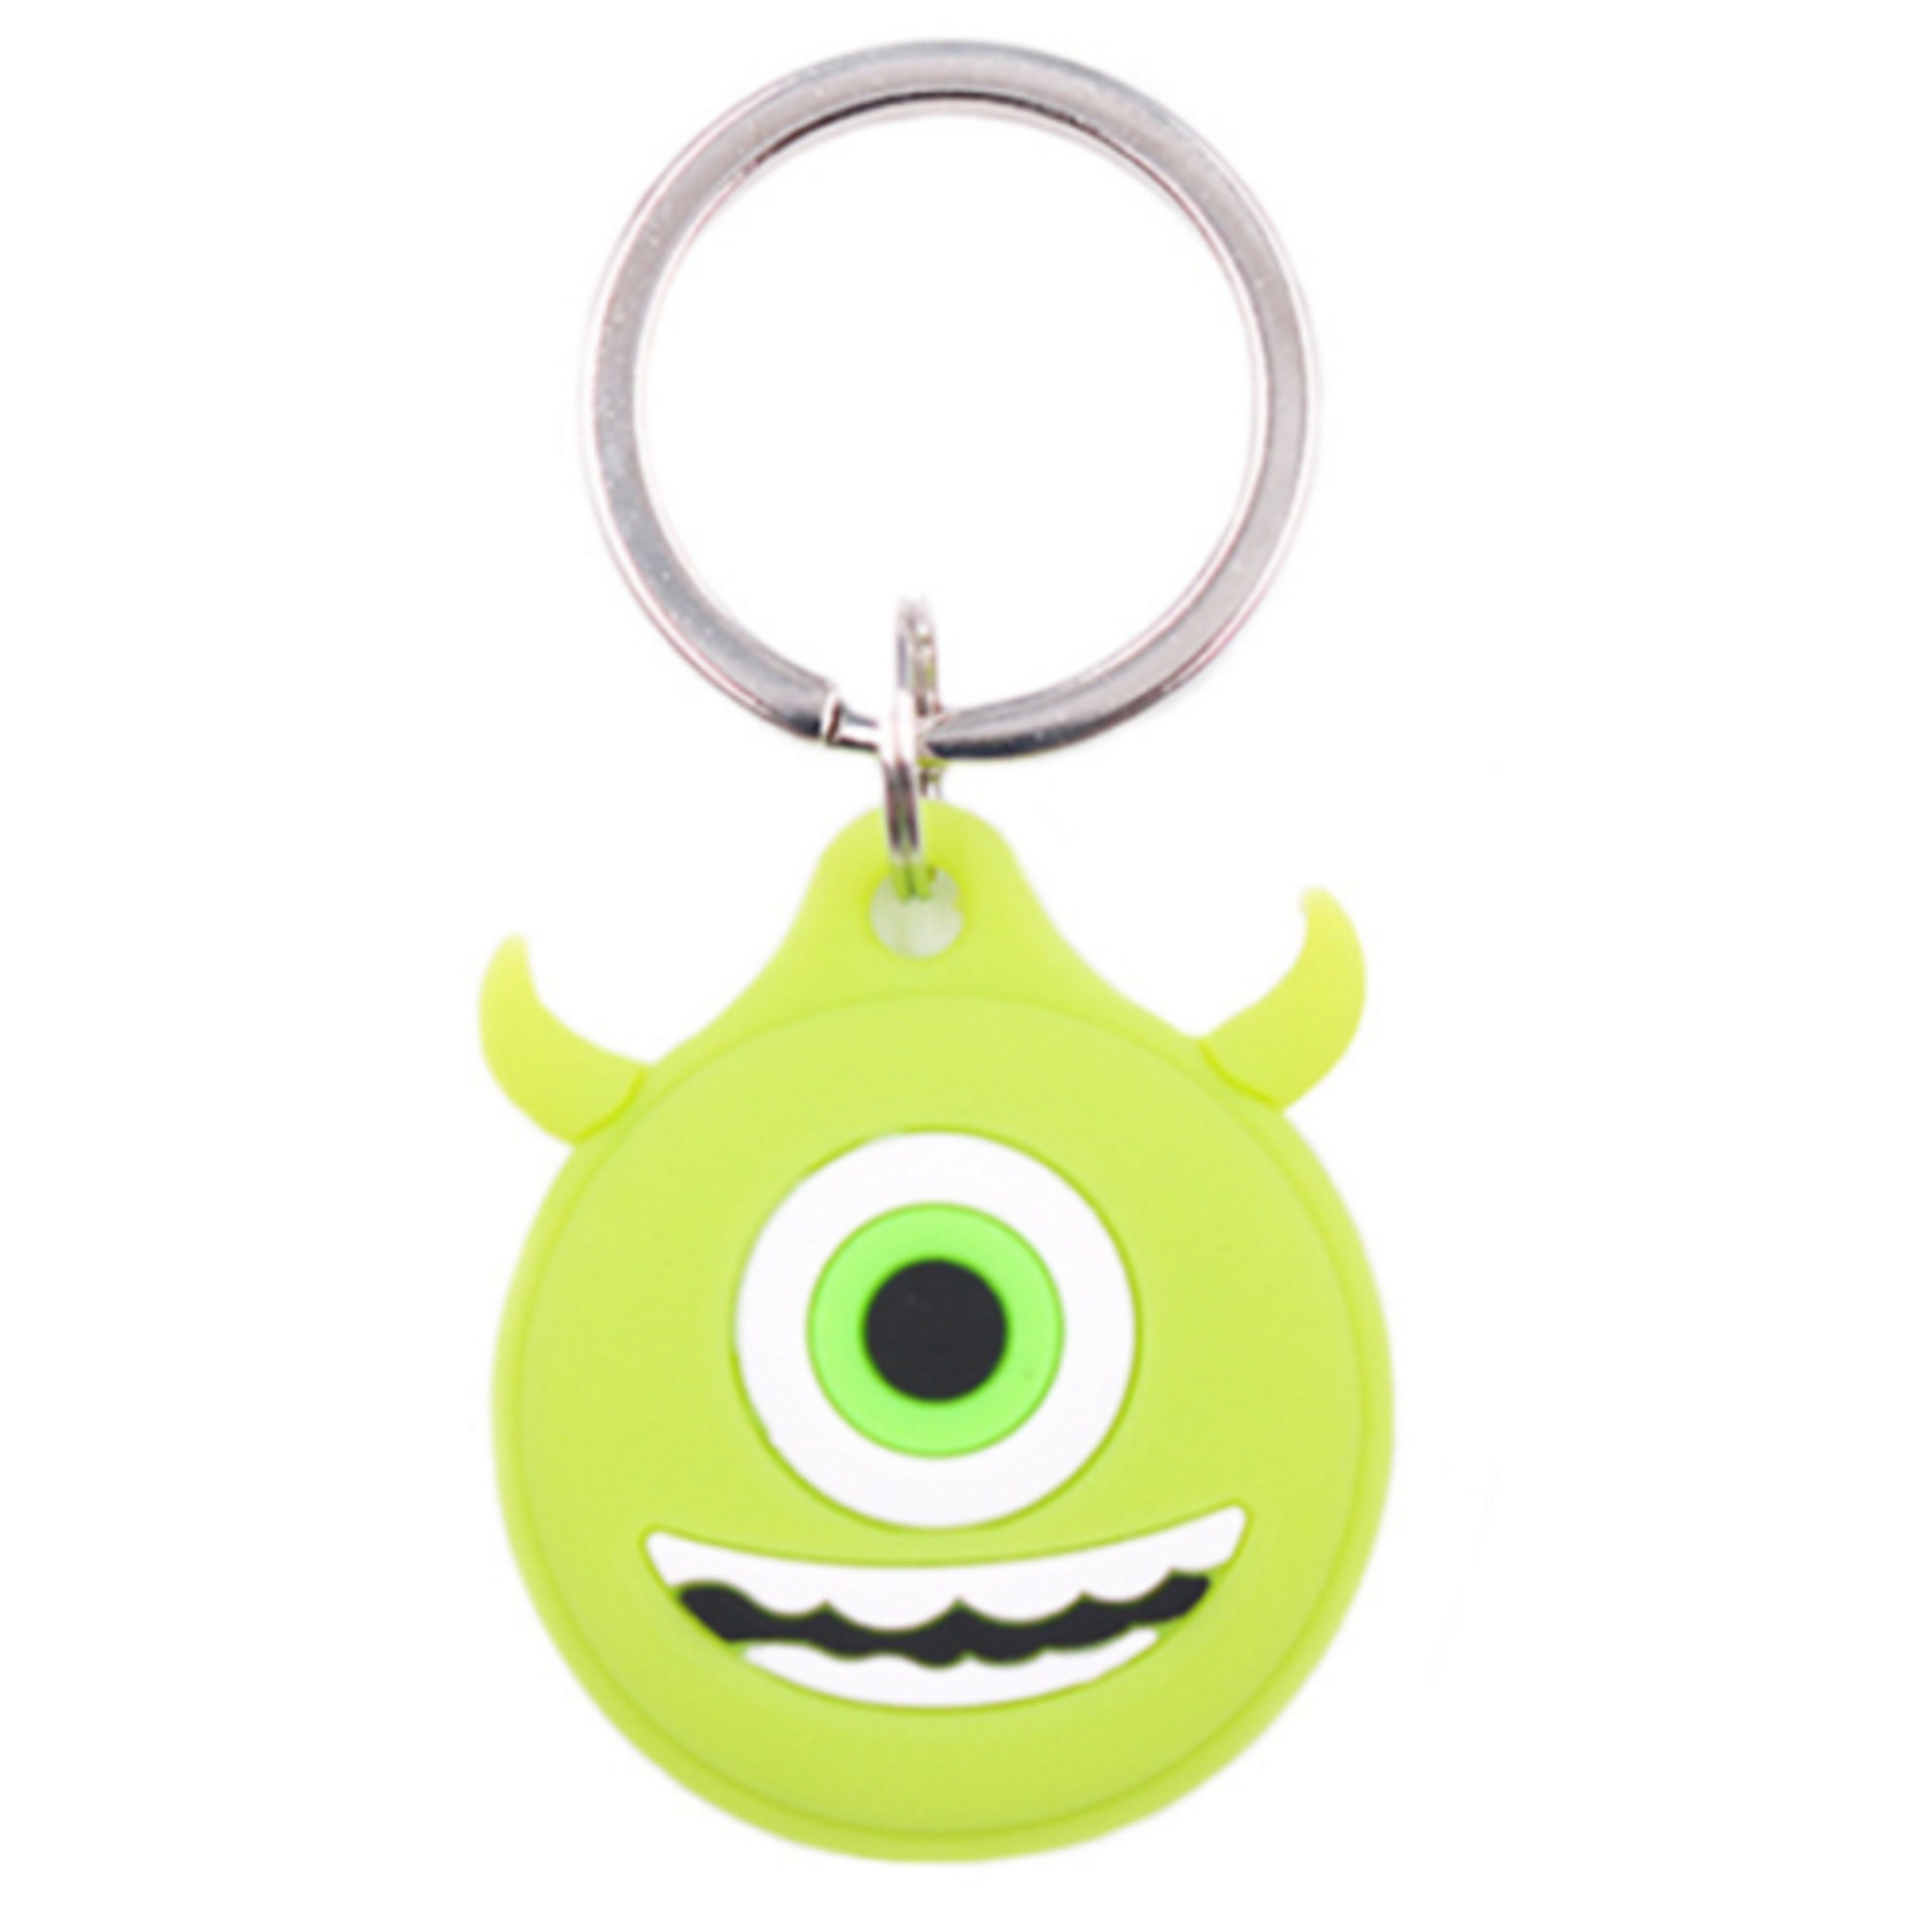 AVALLONYA Porte Clef Airtag - Protection en Silicone Lavable